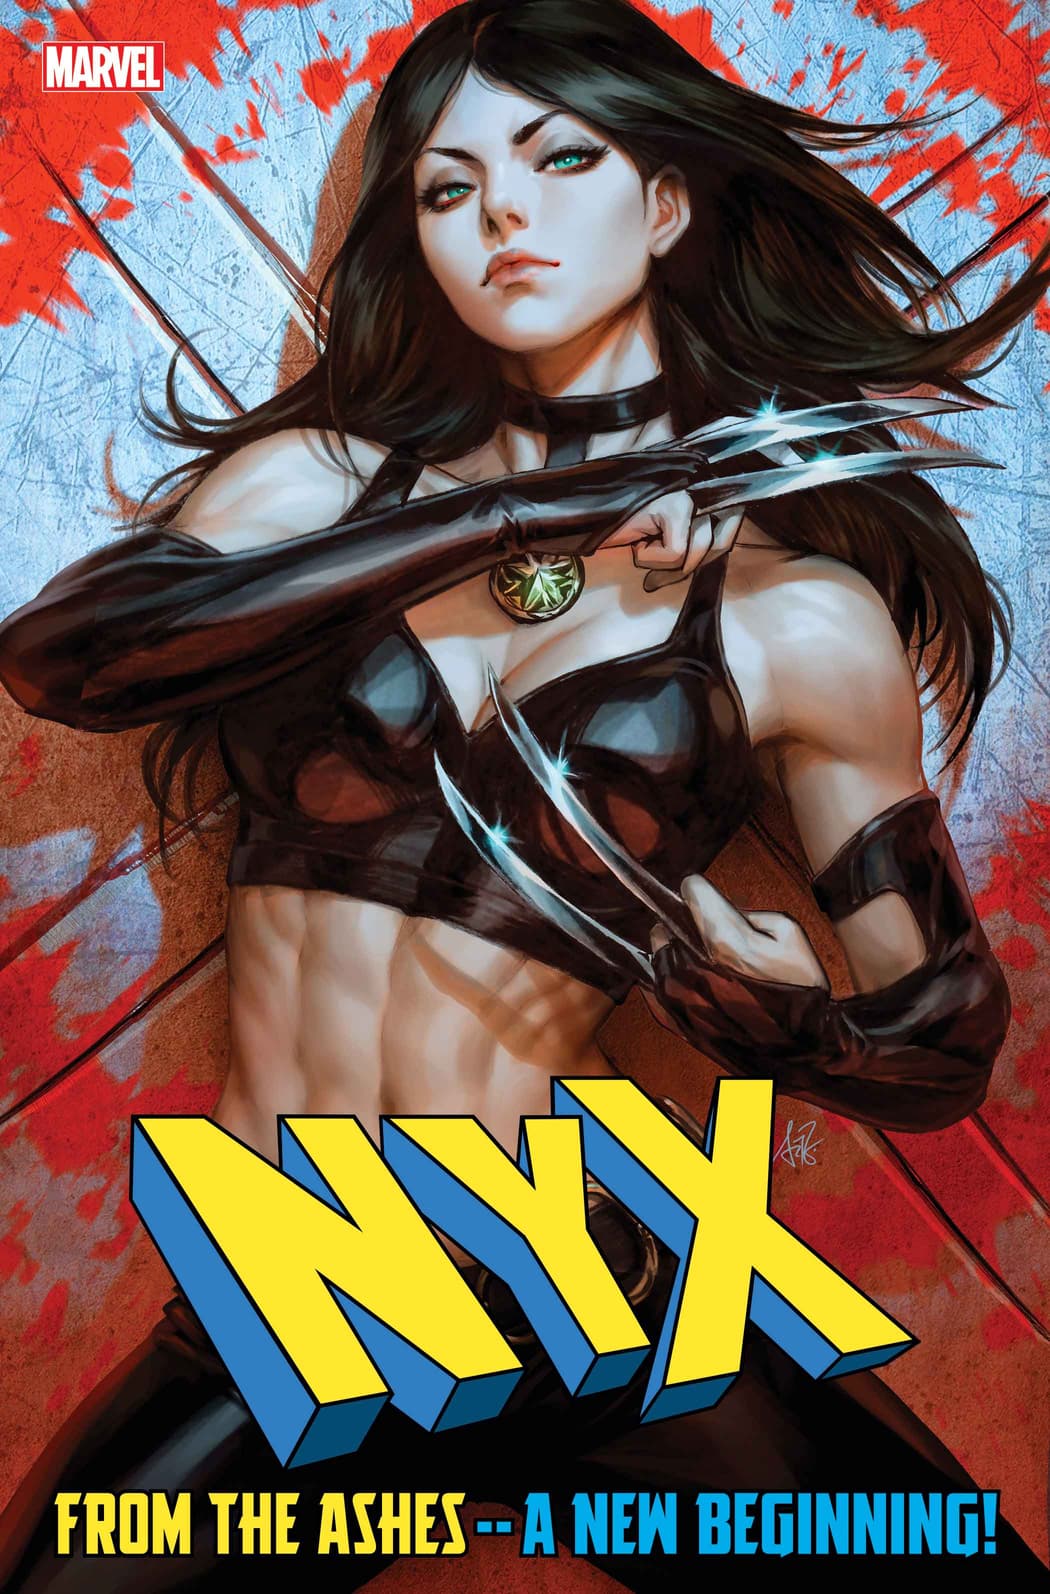 NYX #1 variant cover by Stanley "Artgerm" Lau